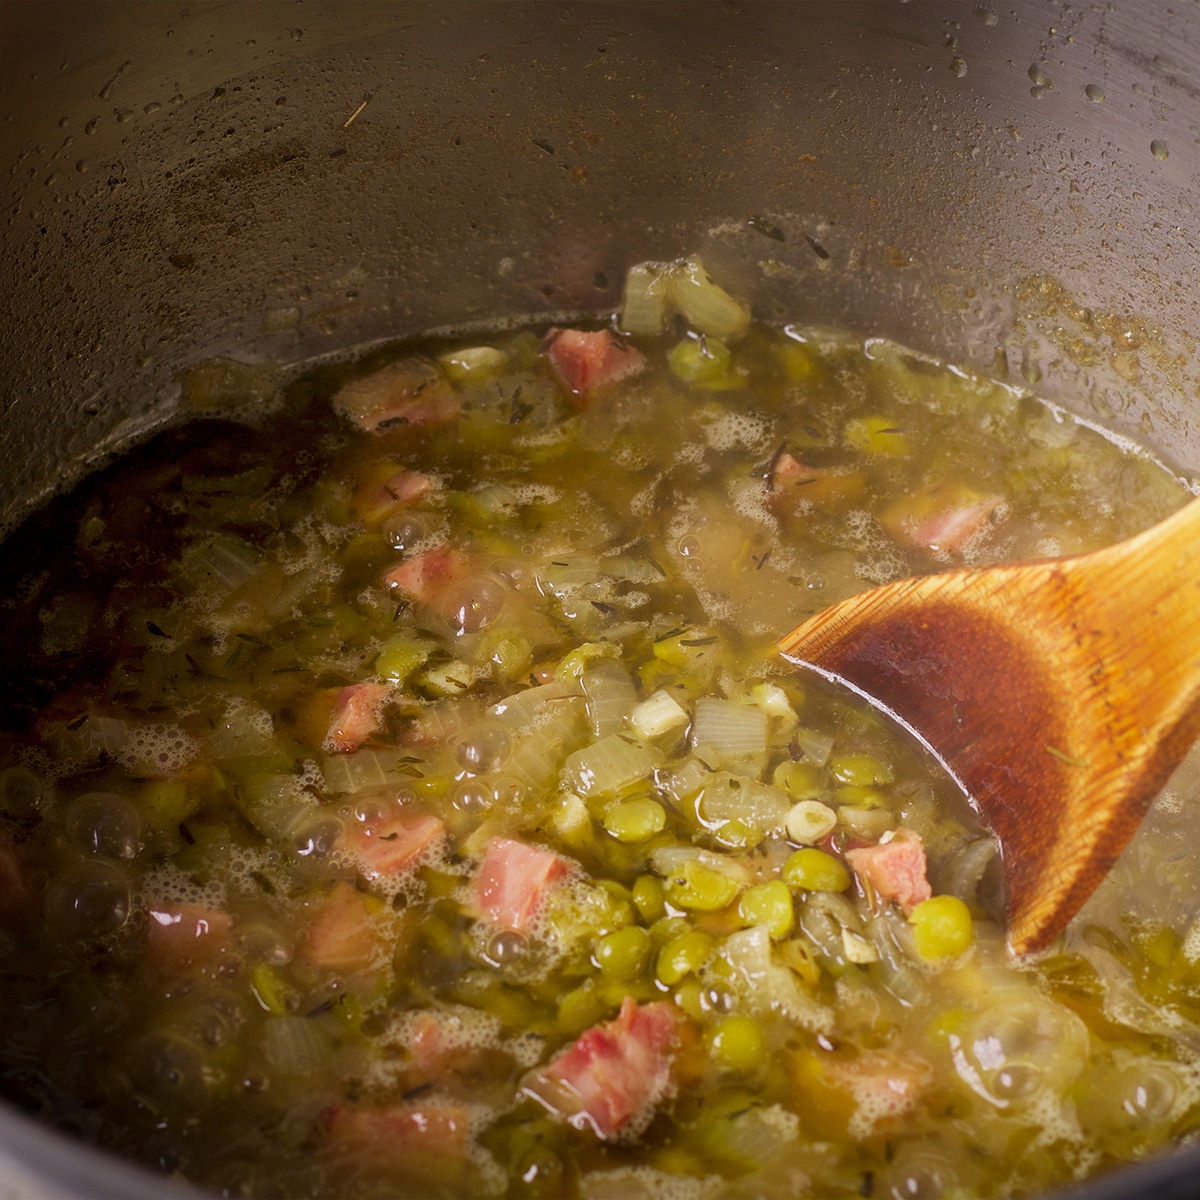 Using a wood spoon to stir a pot of split pea soup while it cooks.